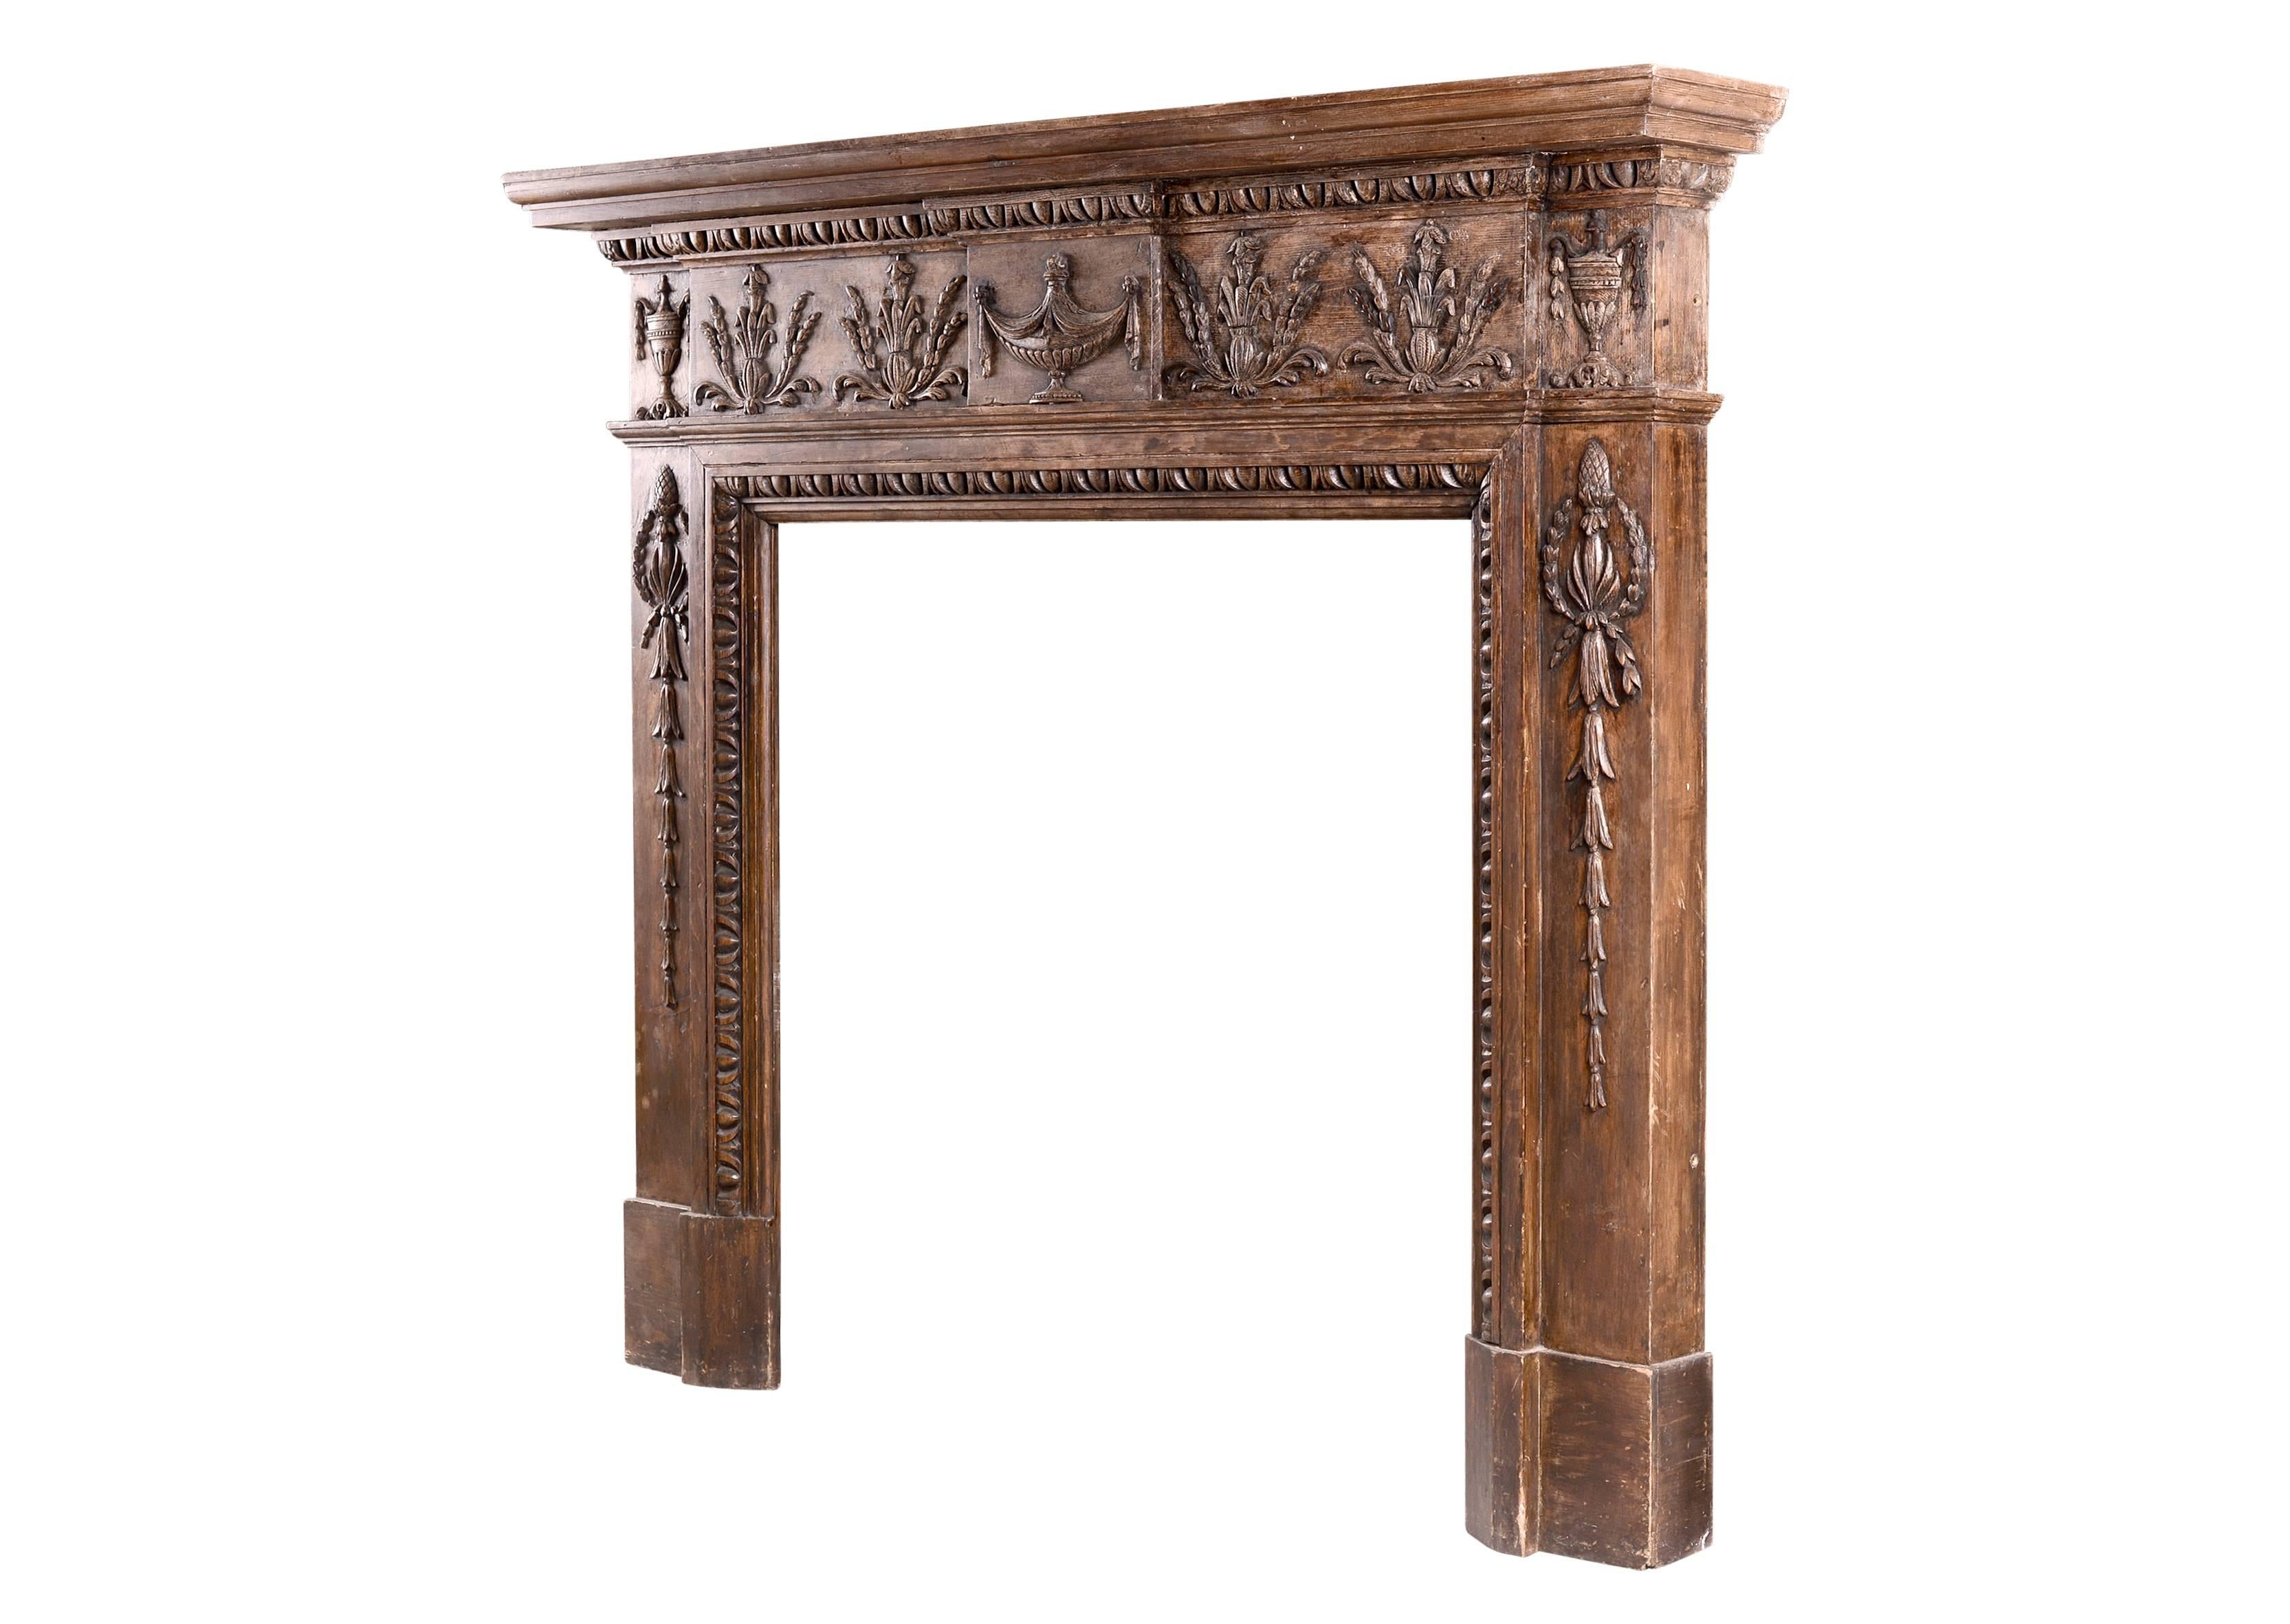 A 19th century English wood fireplace. The carved frieze featuring urns to centre block flanked by Athemion foliage. The jambs with carved belldrops, acorns and floral wreaths. Egg and dart moulding to ingrounds.

Shelf width - 1492 mm 58 ¾